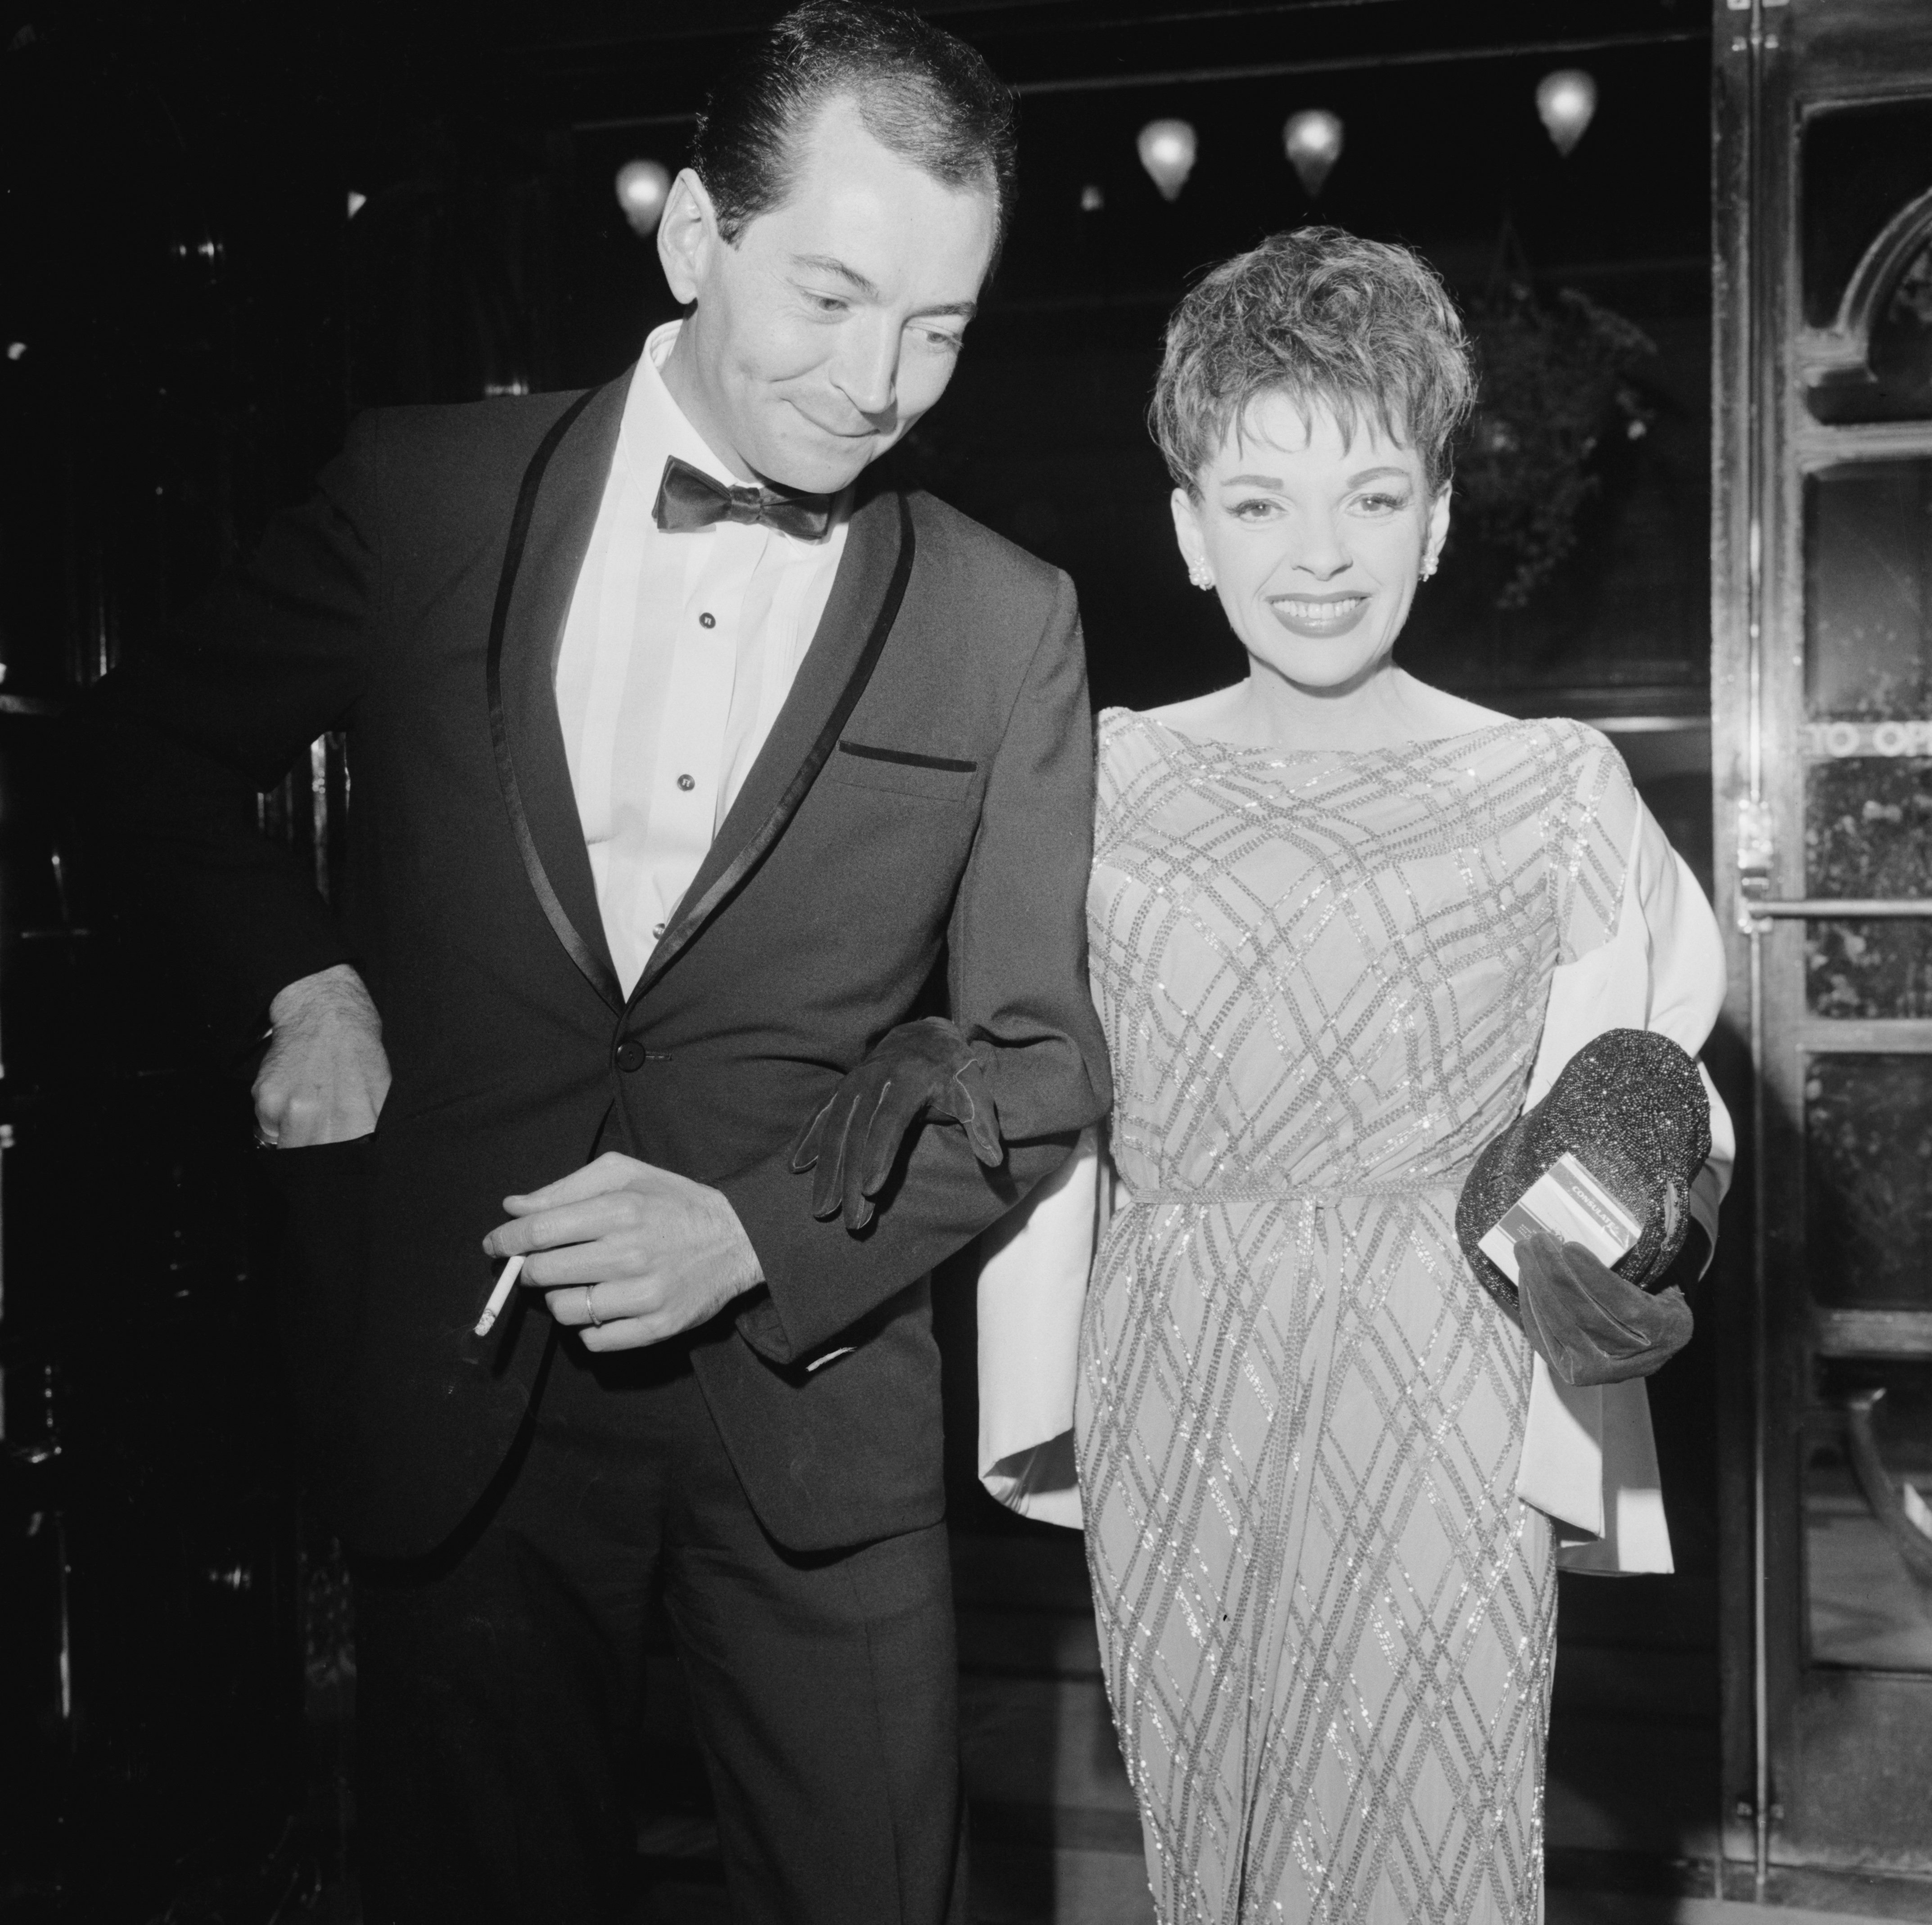 Judy Garland and Mark Herron on July 23, 1964 in London, UK | Source: Getty Images